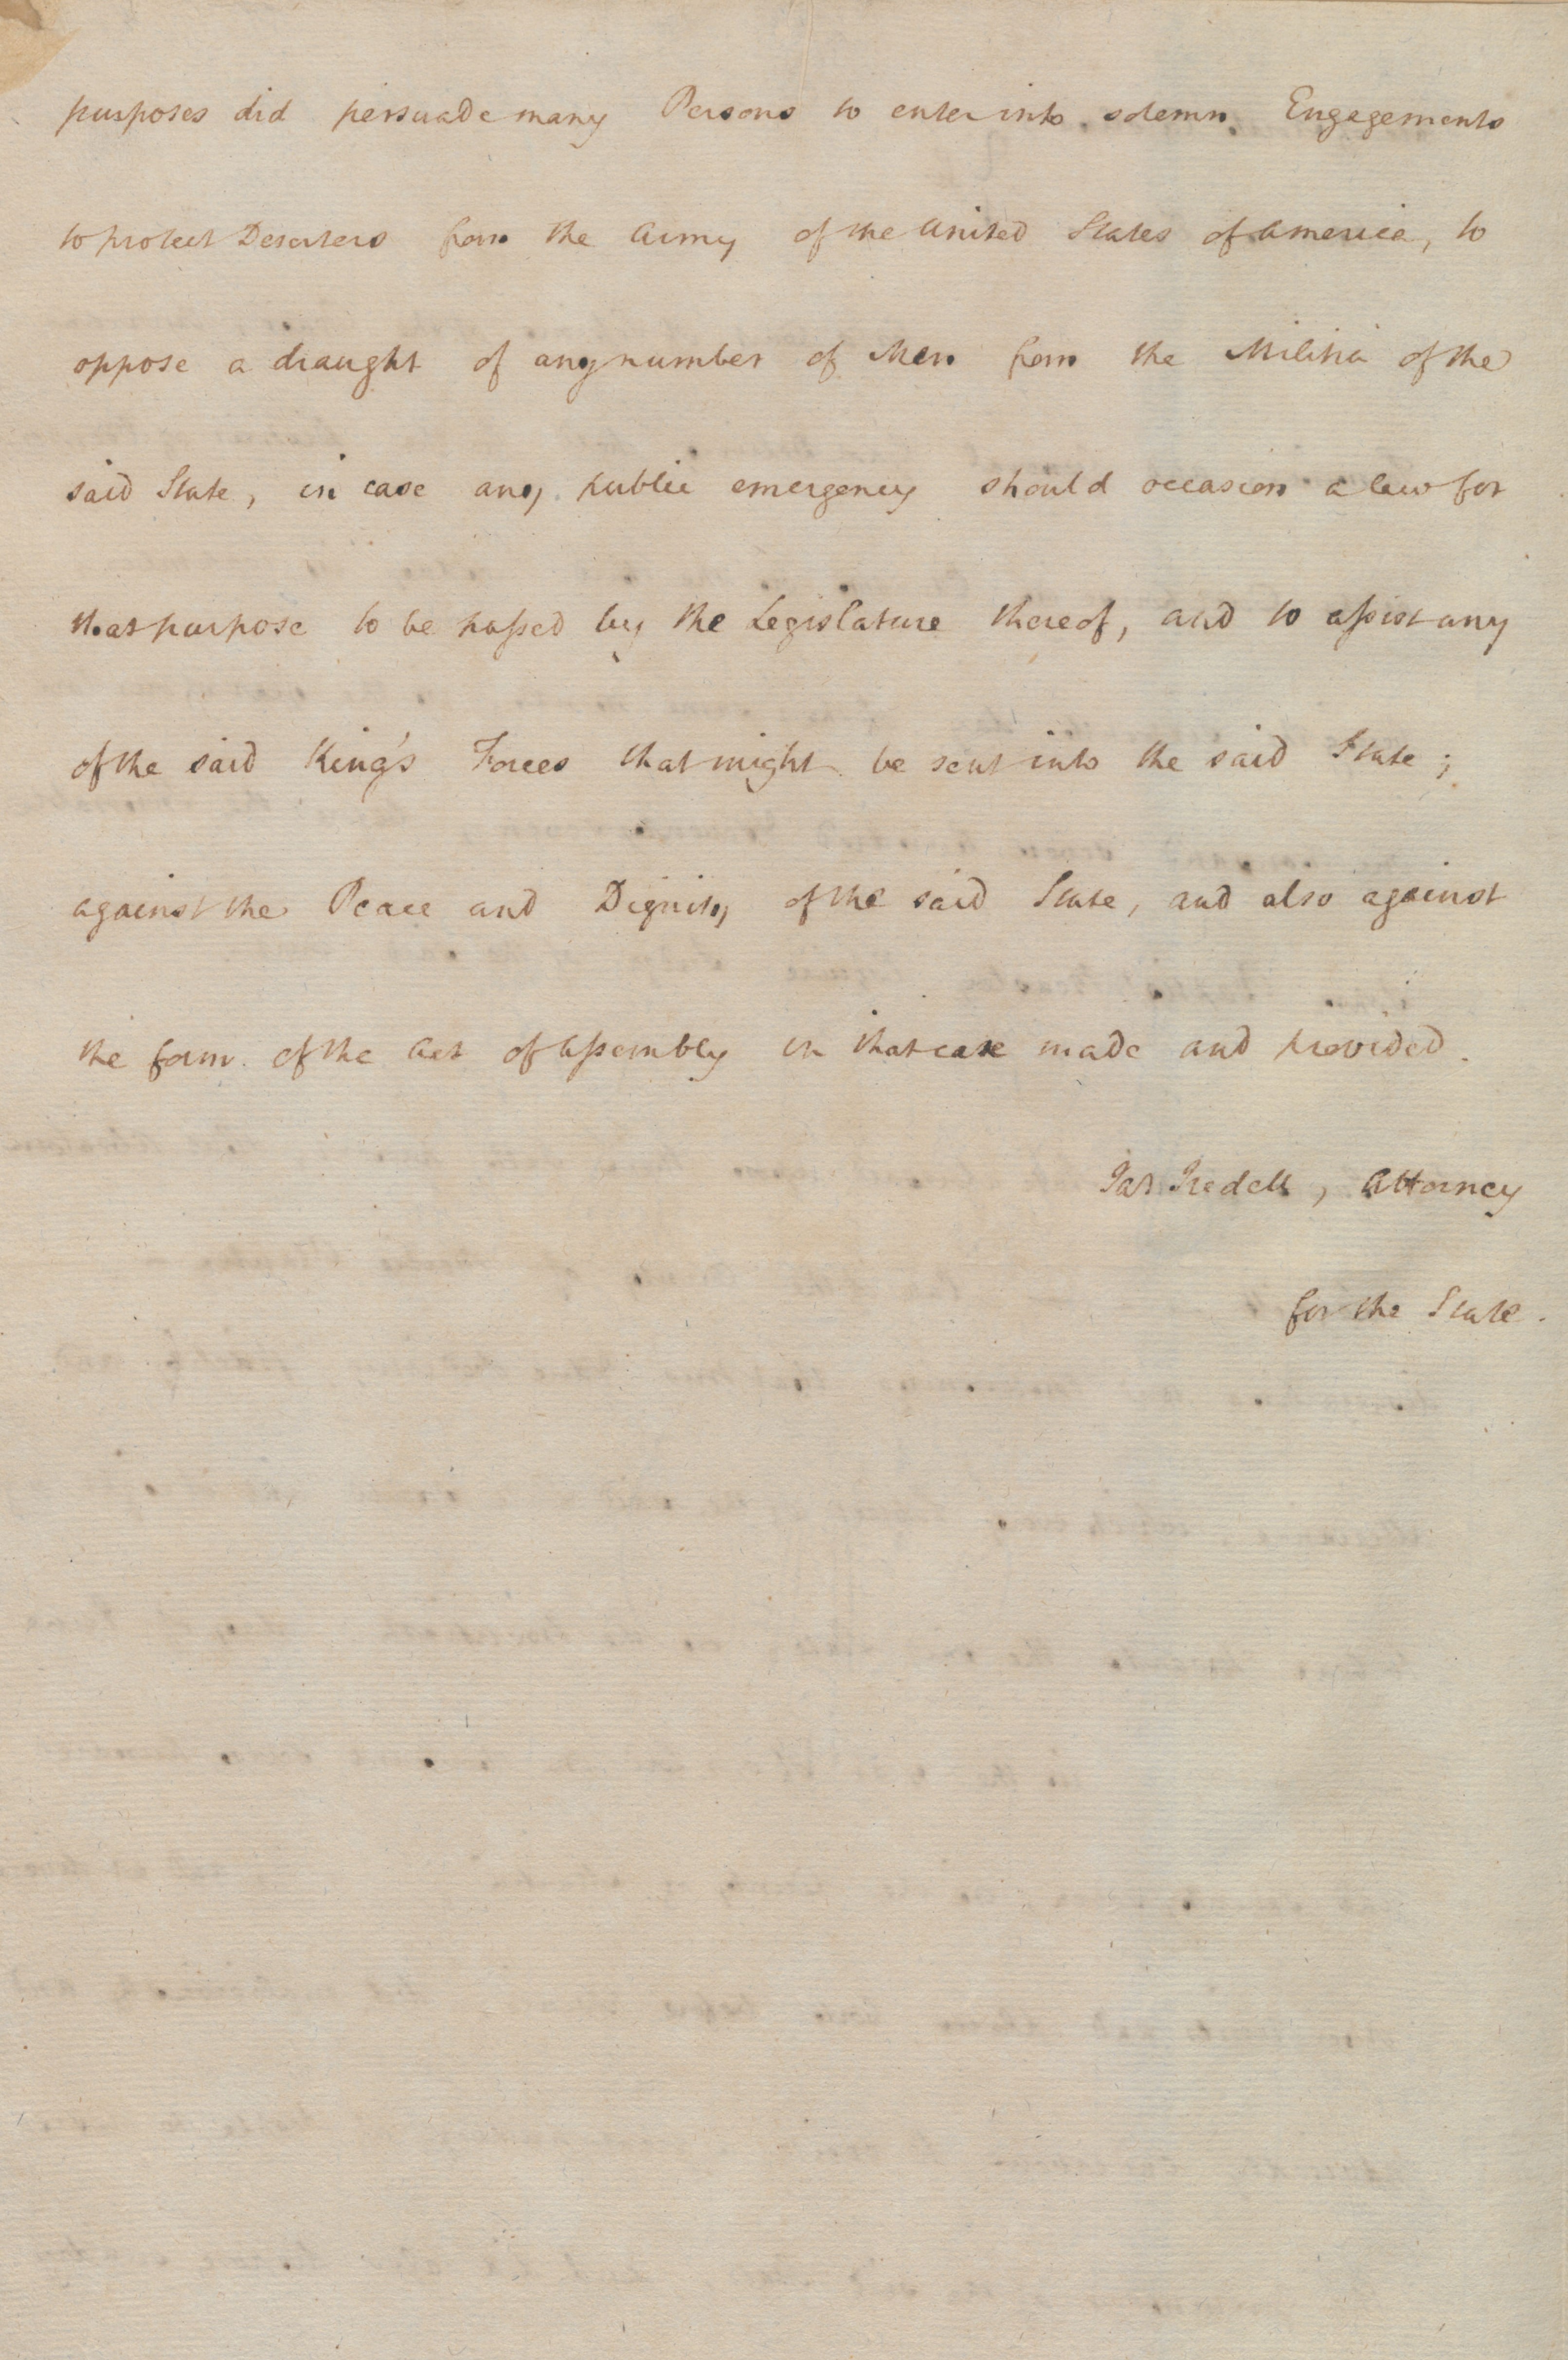 Indictment from the Edenton District Court against Absalom Leggett, 16 September 1777, page 2